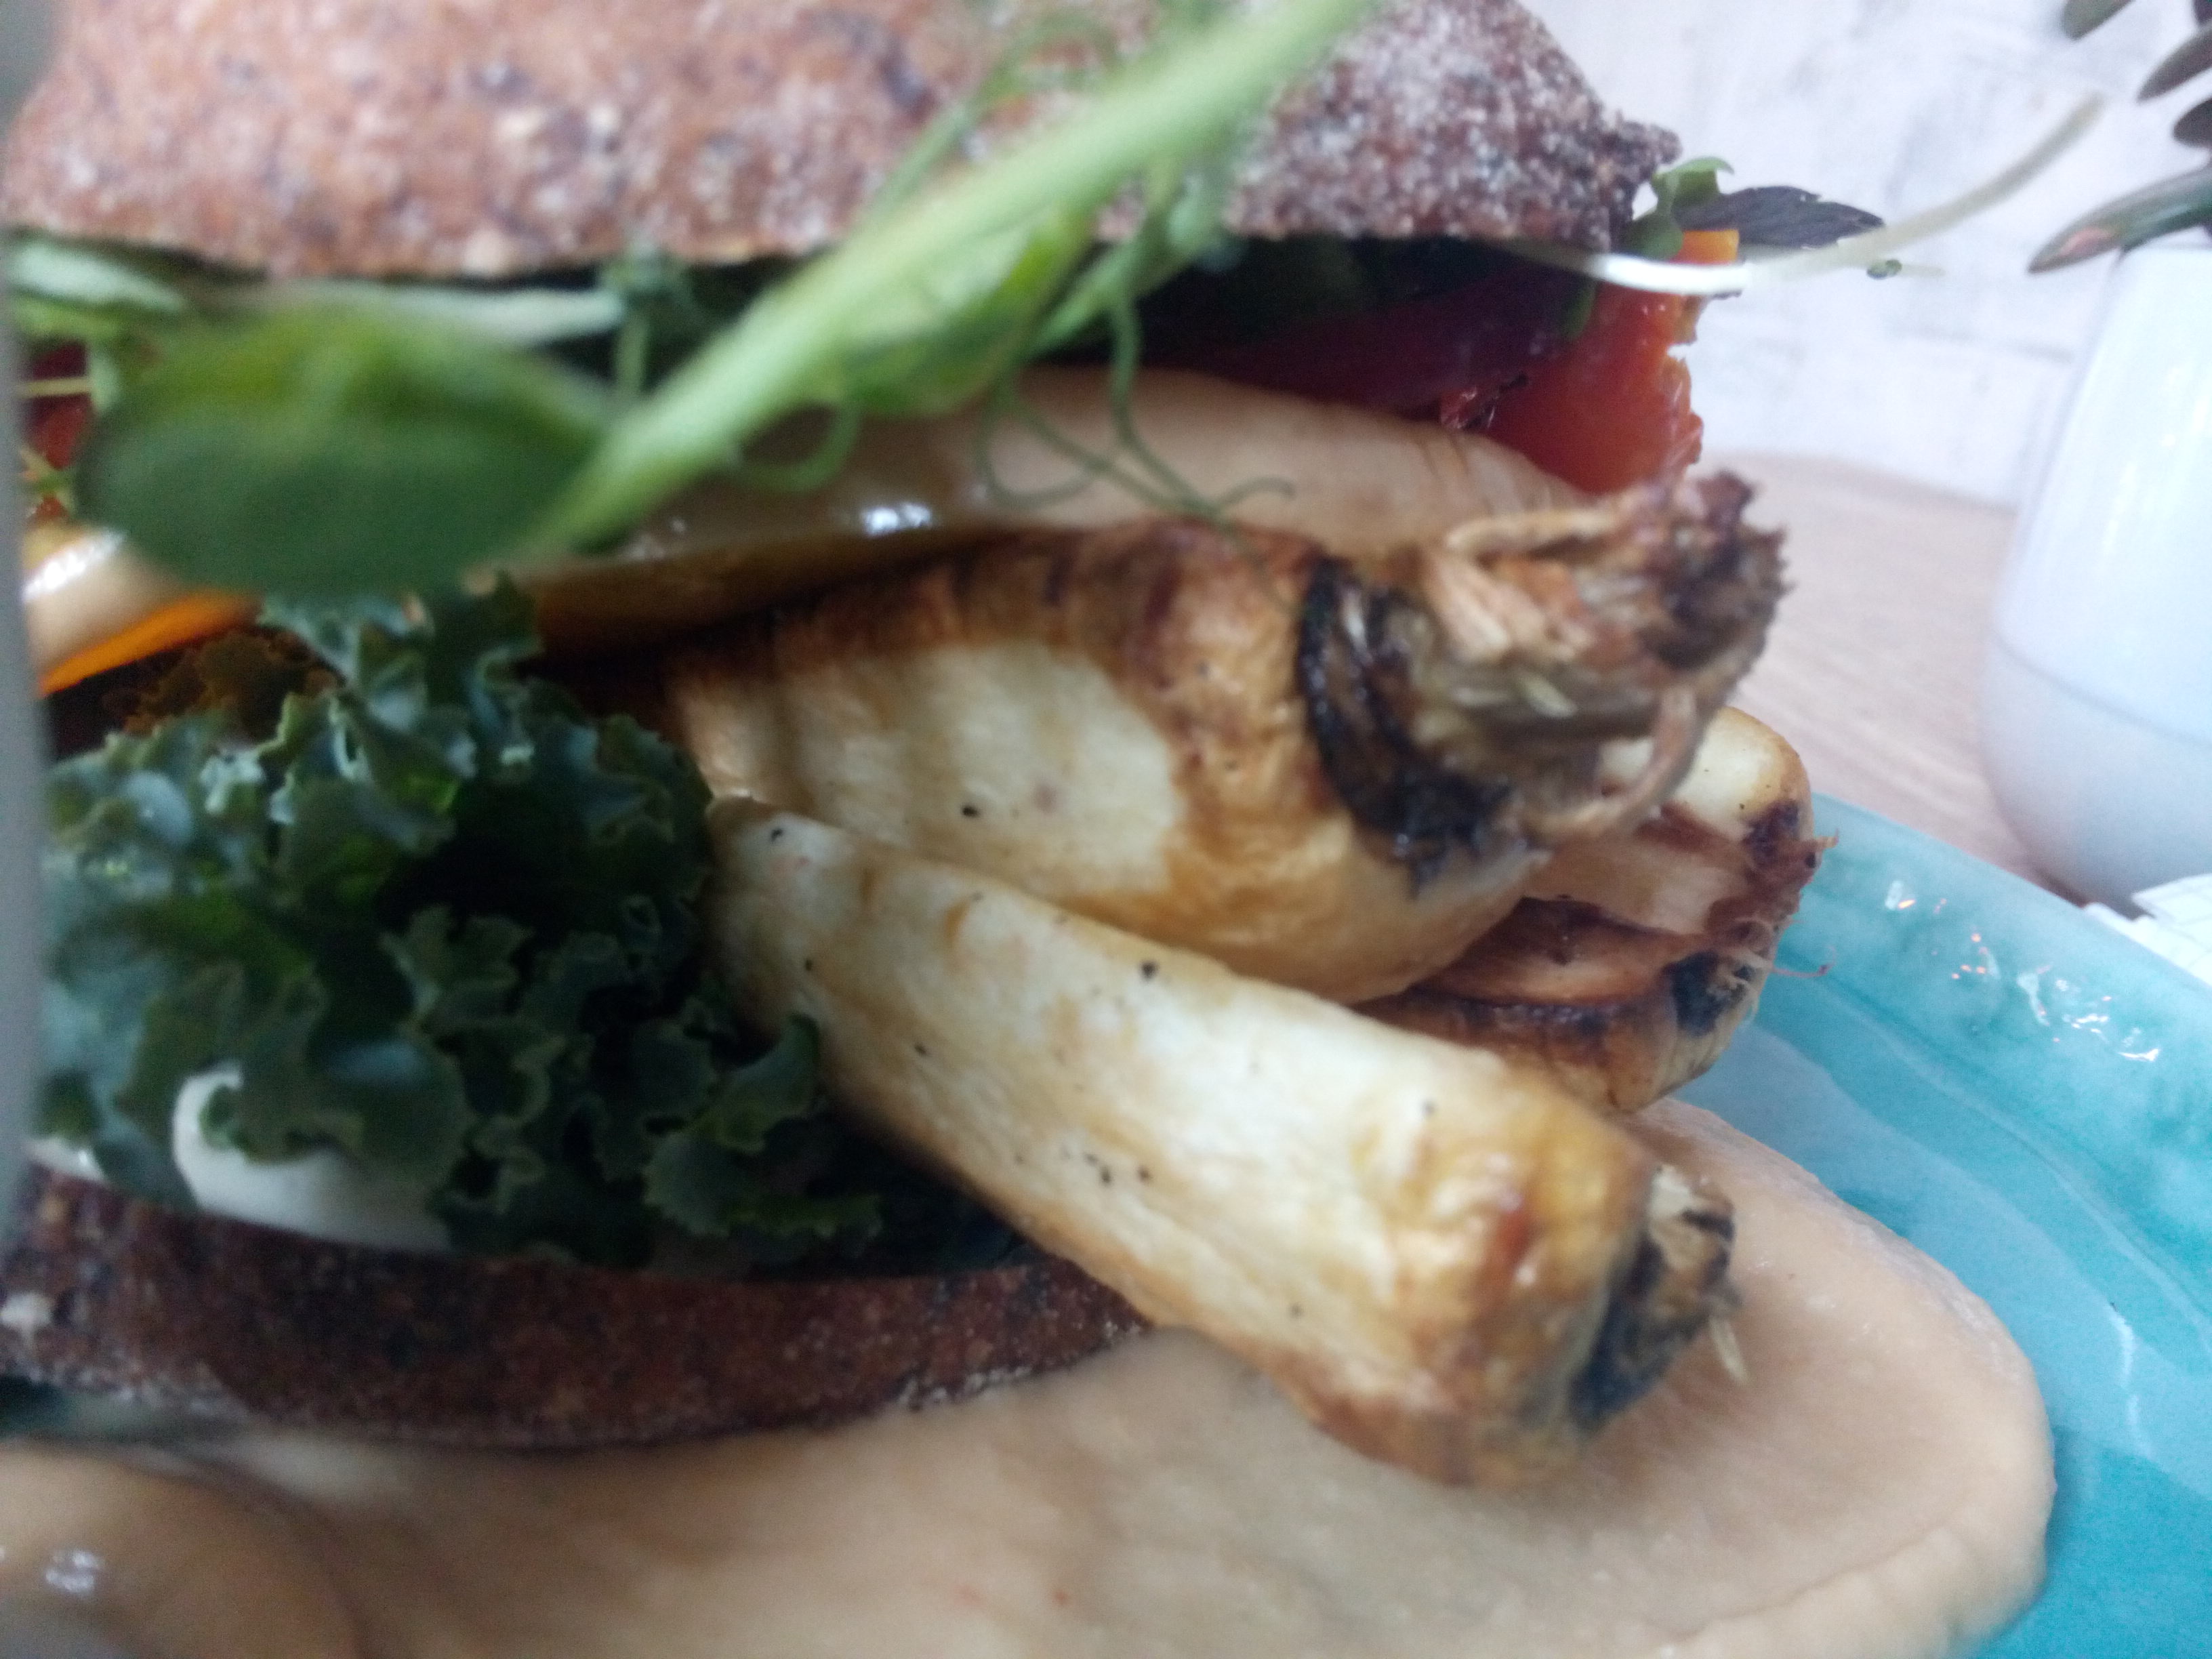 Close up of root vegetable burger, with parsnips and kale poking out from the bread